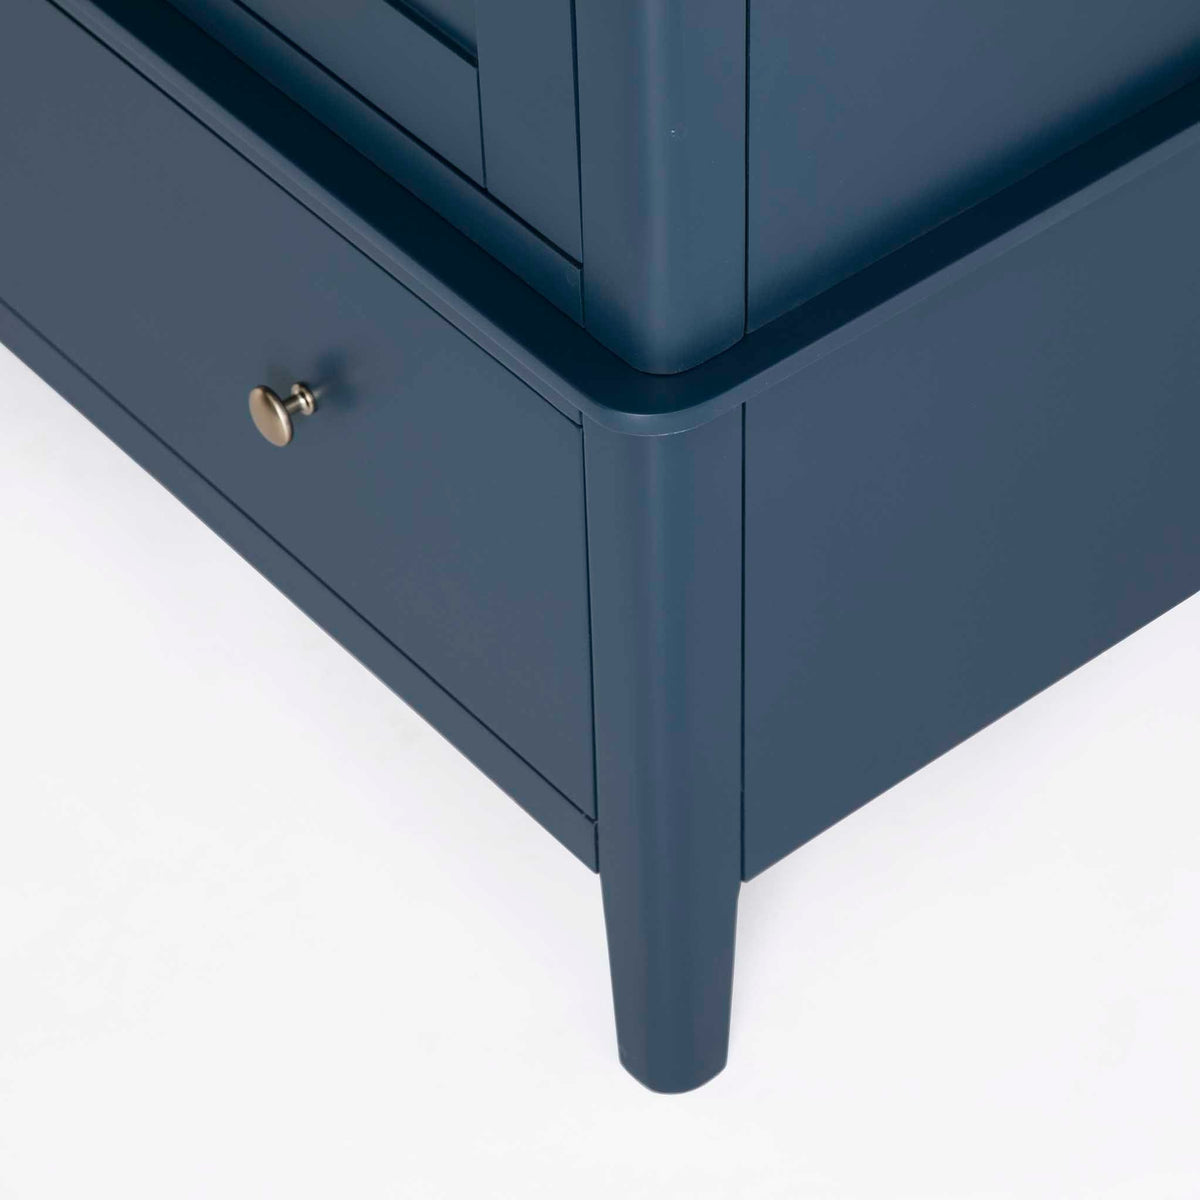 Stirling Blue Double Wardrobe - Looking down at lower drawer